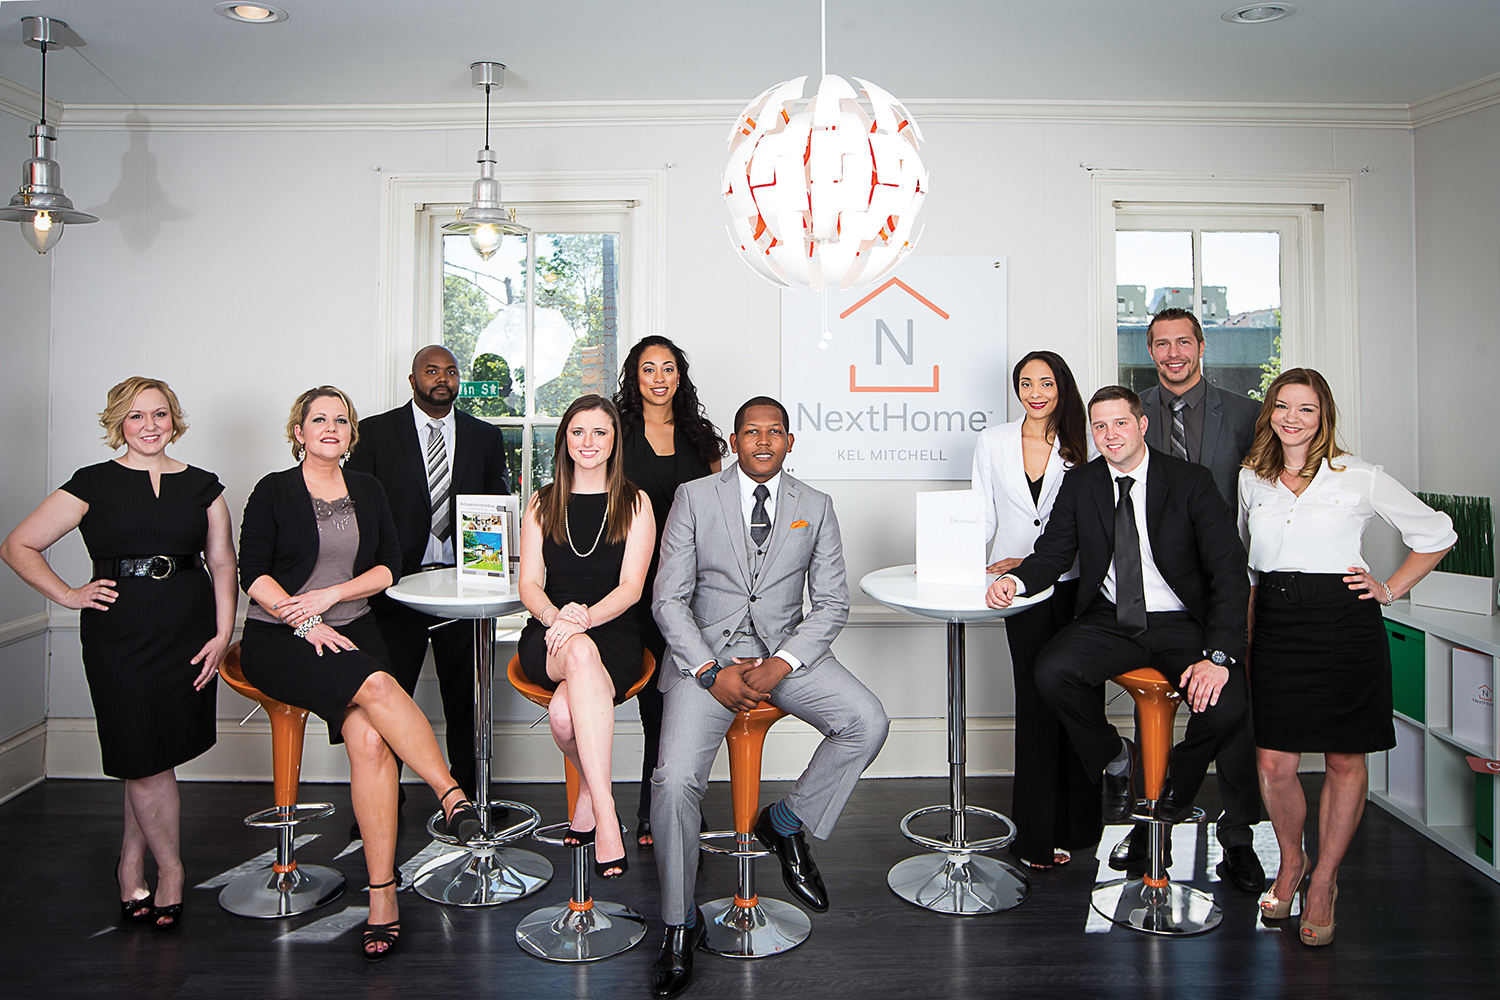 NextHome believes the future of real estate brokerage lies in smaller, more productive offices.